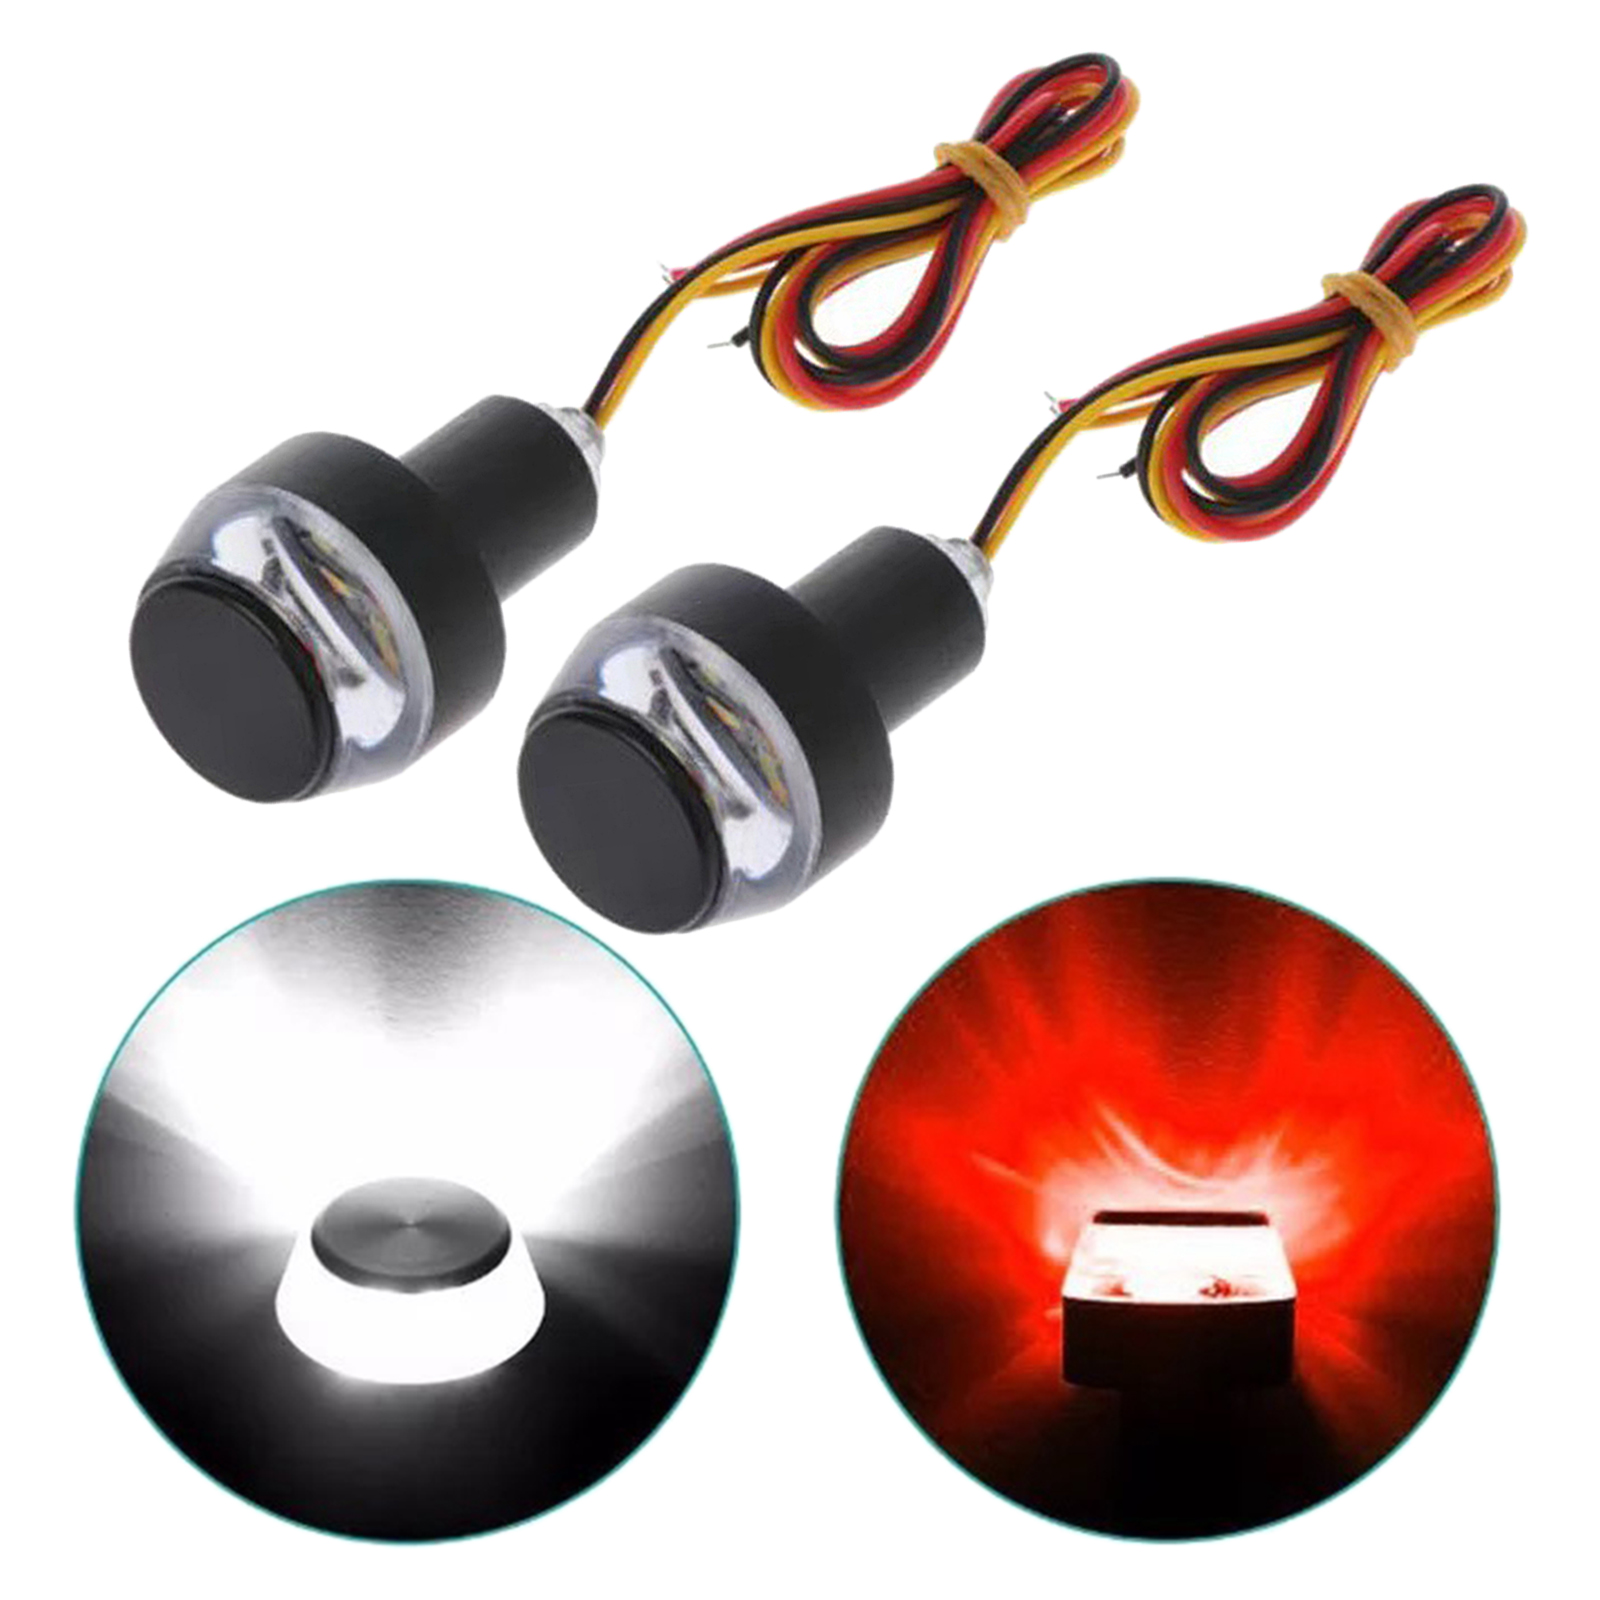 Turn Signal Indicator DC12V for Motorcycle Replacement Parts Accessories White+Red LIght